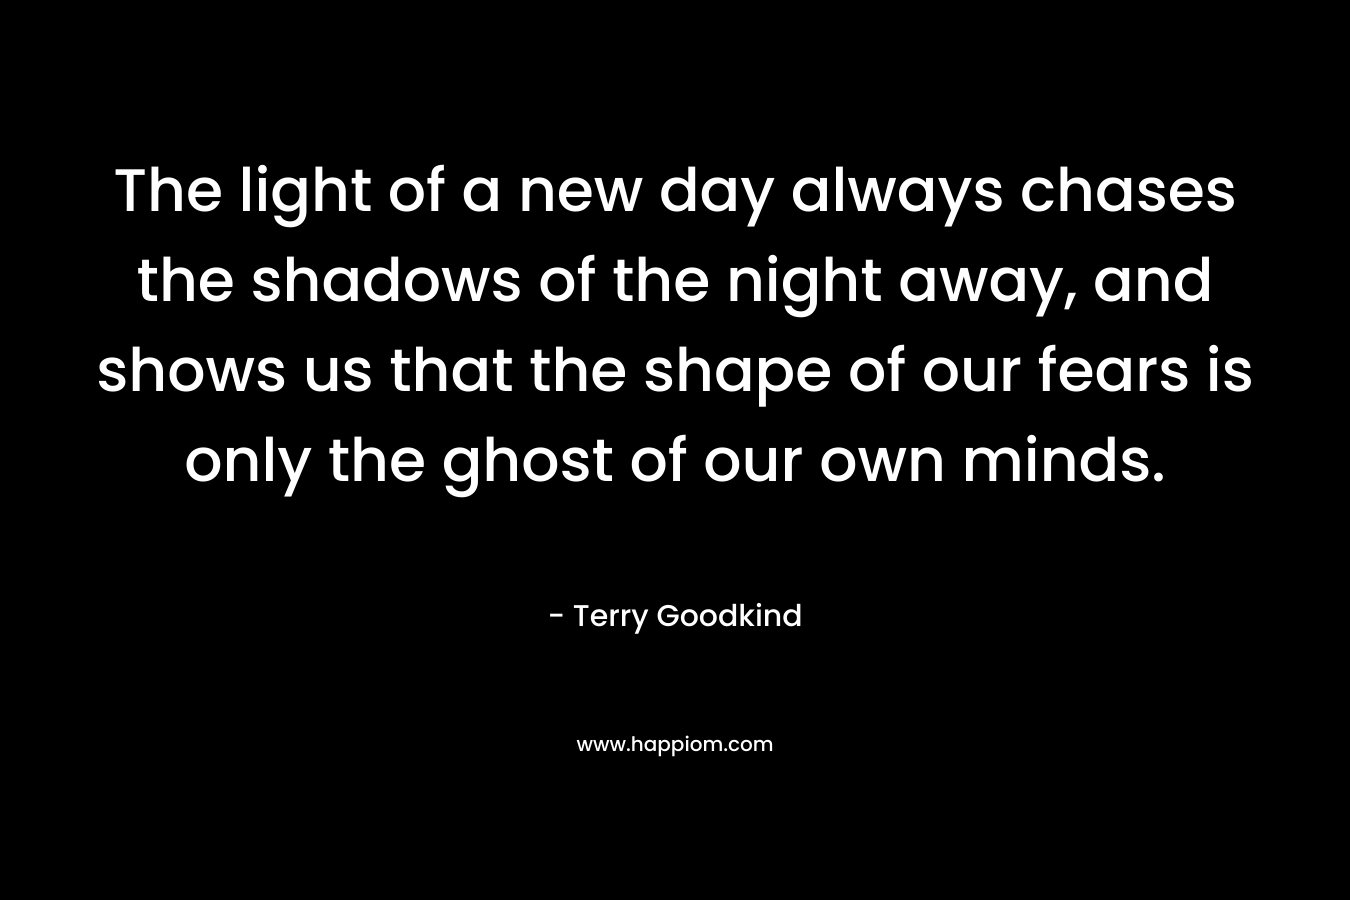 The light of a new day always chases the shadows of the night away, and shows us that the shape of our fears is only the ghost of our own minds. – Terry Goodkind